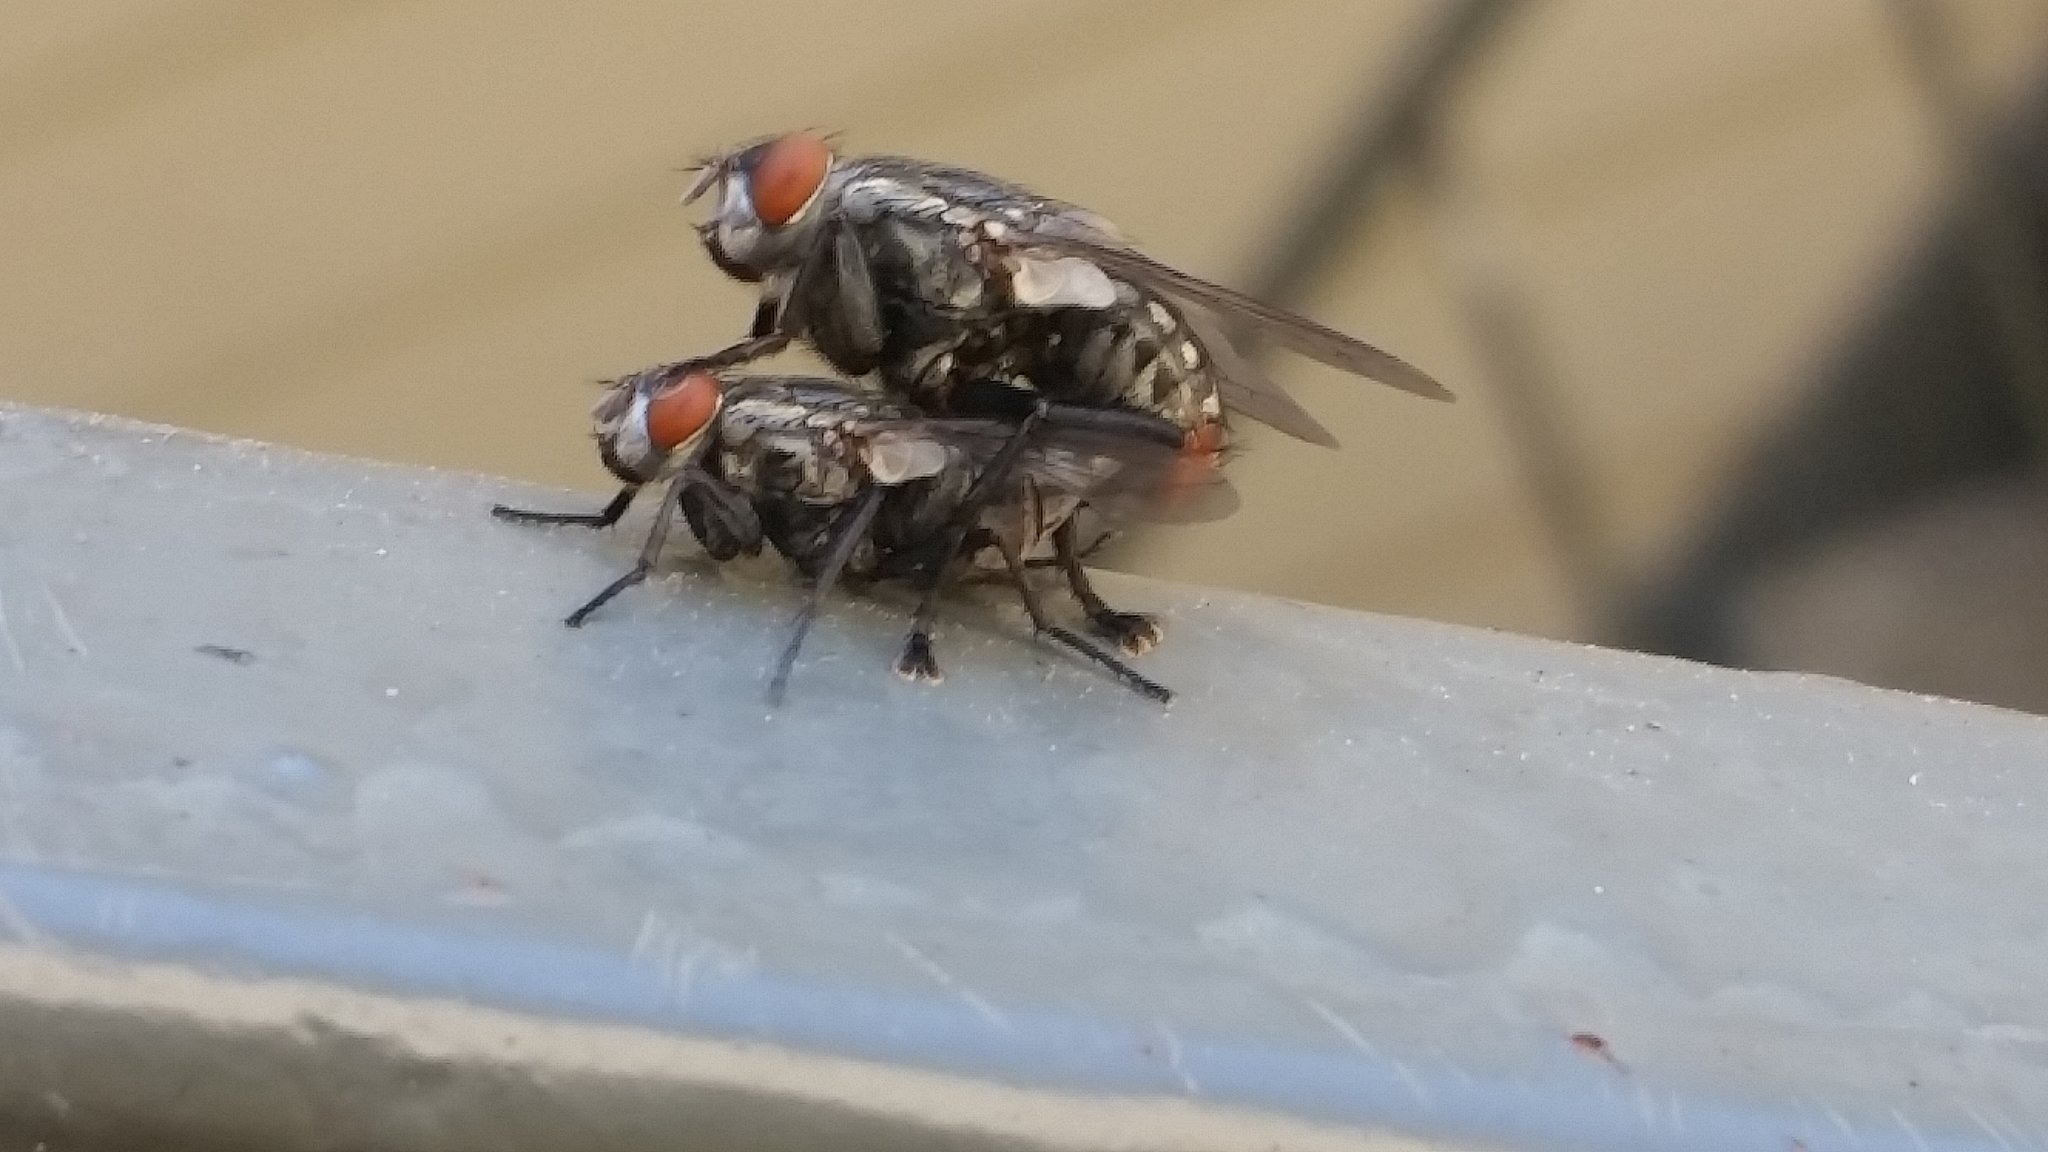 Walked in on two flies fucking : pics